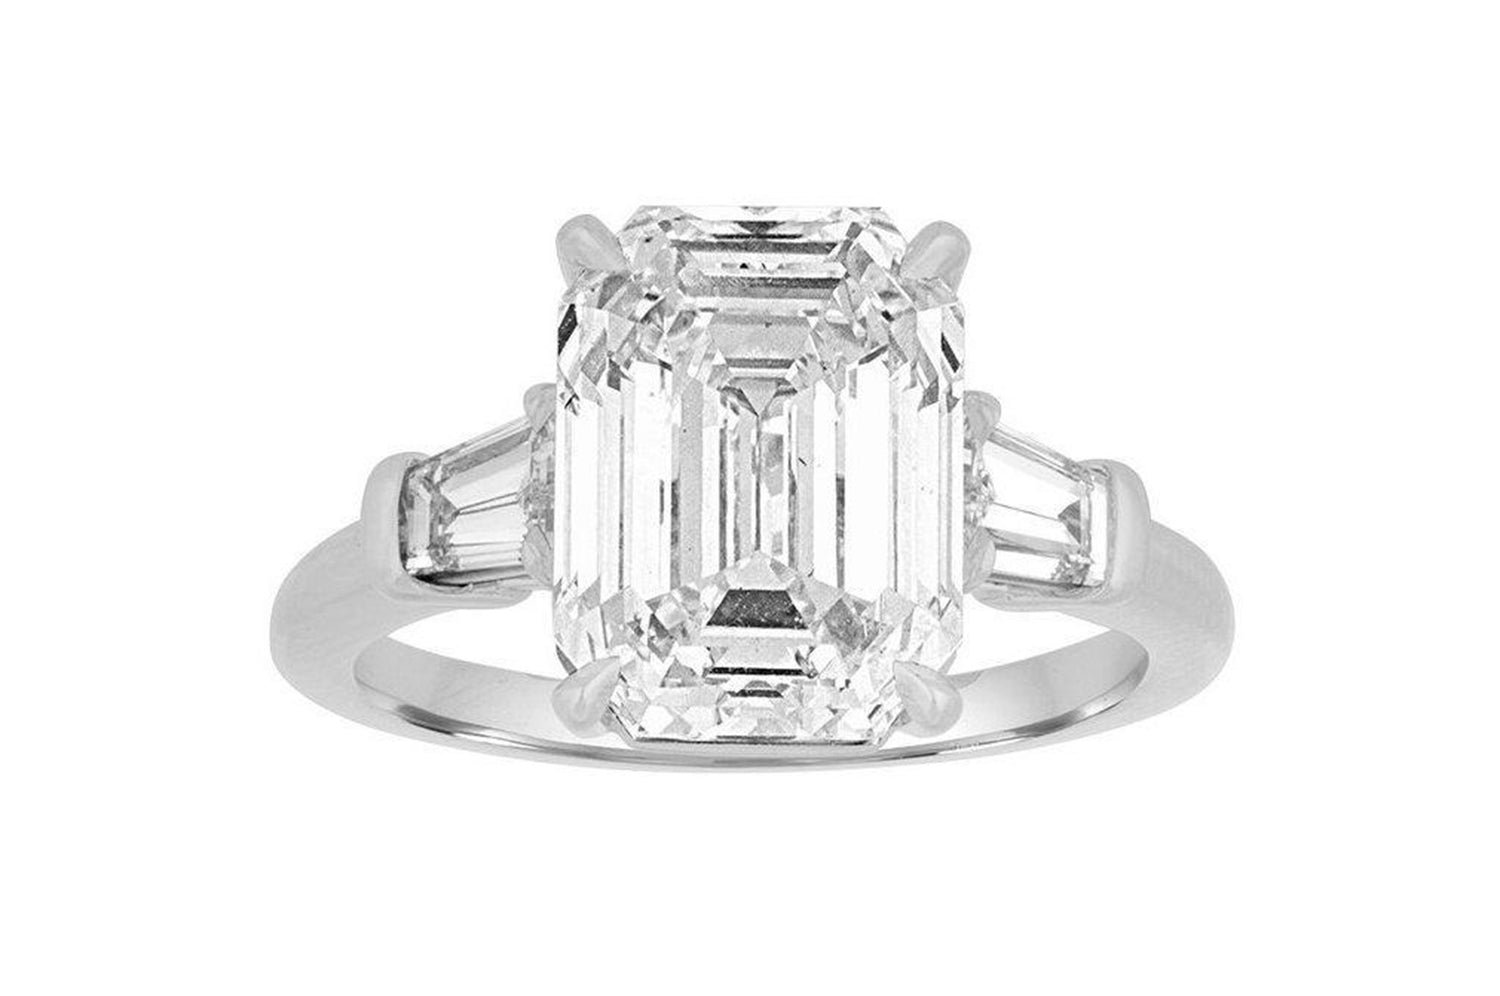 Stunning Emerald Cut Engagement Ring with Tapered Baguettes